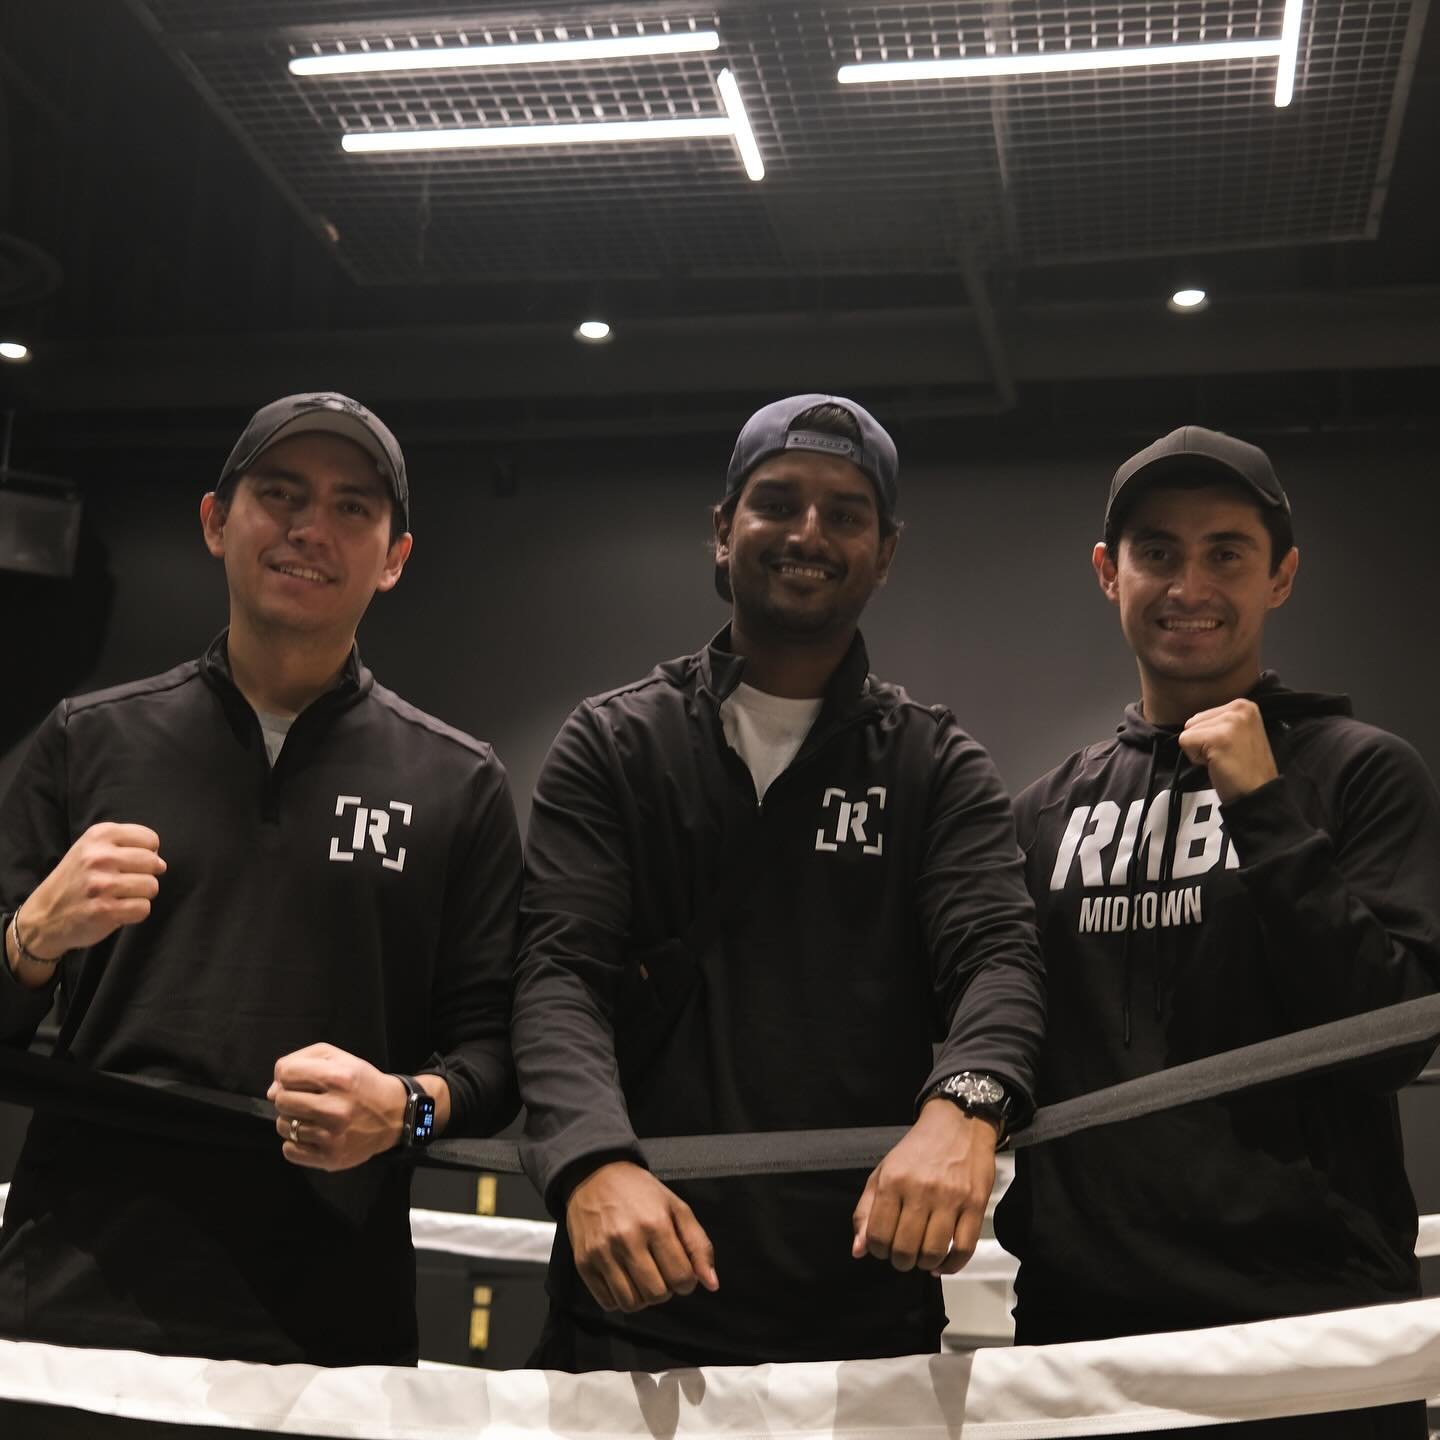 Rumble Midtown GRAND OPENING Weekend 🎉🥊

Taking a moment to reflect, we&rsquo;re truly thankful for the dedication and joy that turned this dream into reality.

To our incredible team, supportive community, and everyone who shared in the excitement